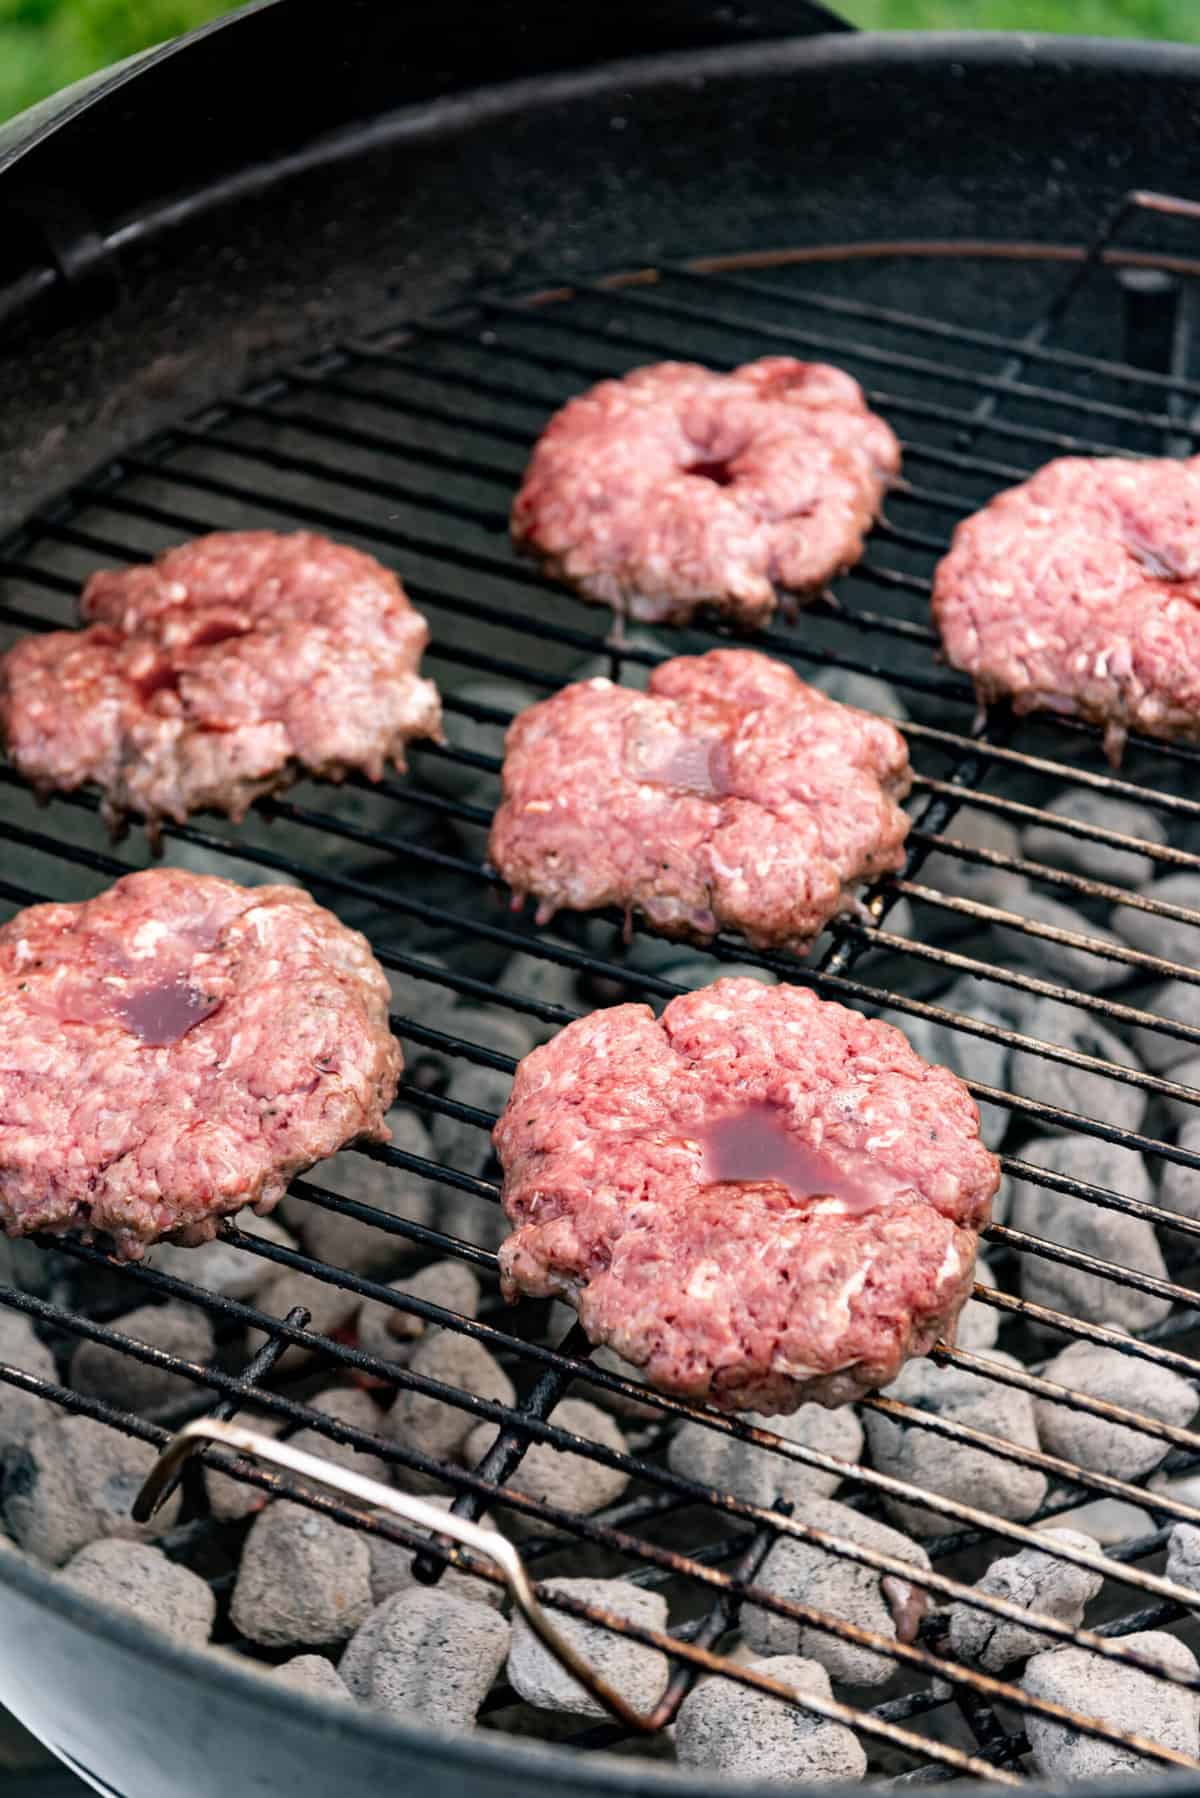 Grilling bison burgers over hot charcoals.